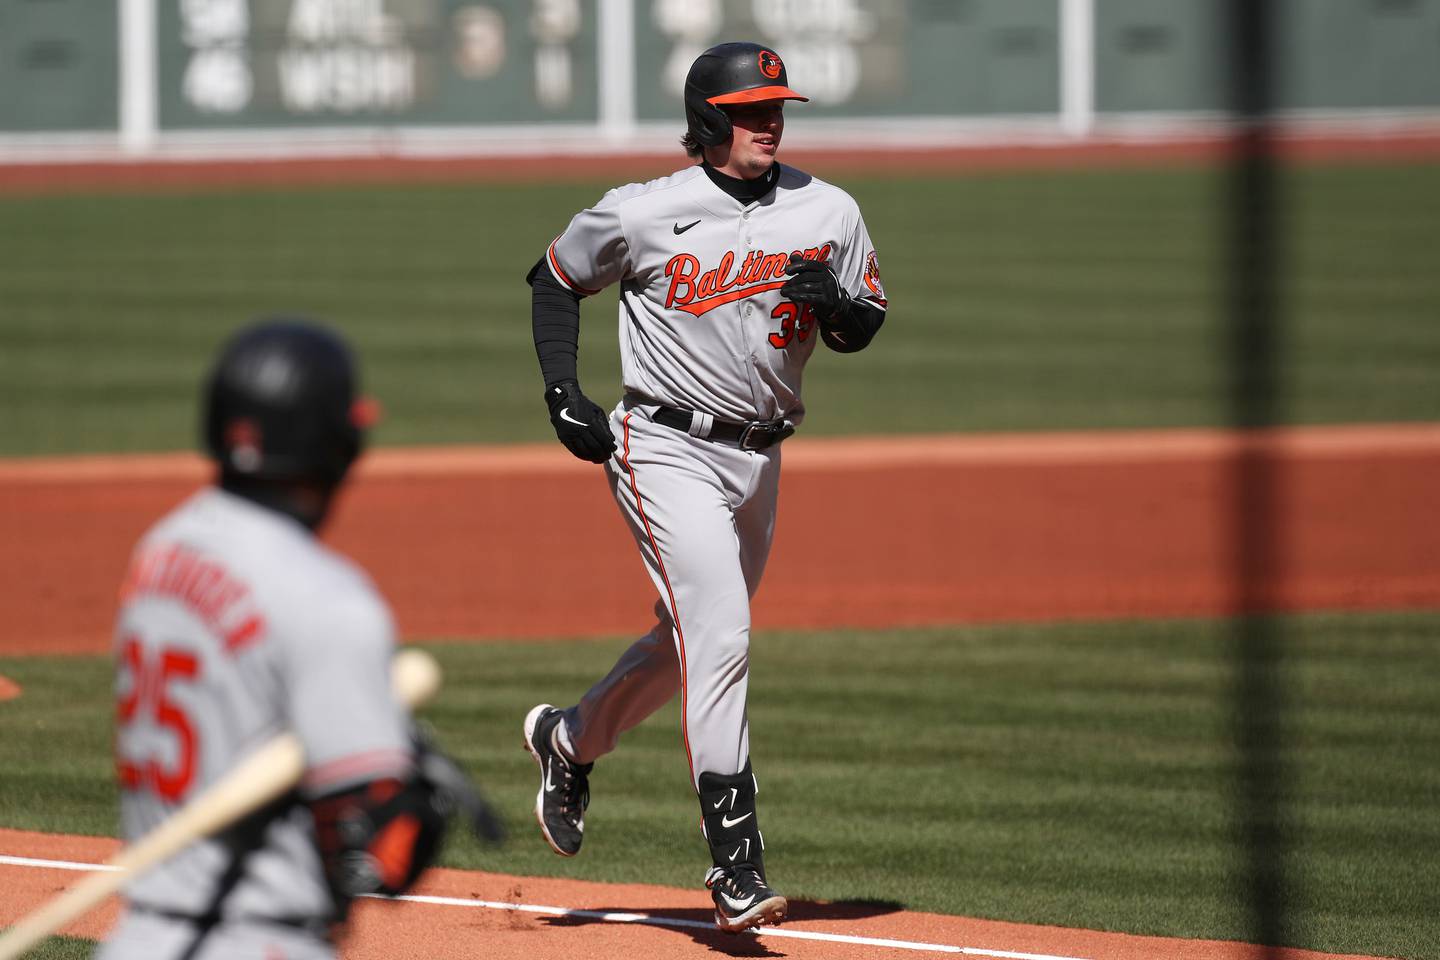 BOSTON, MASSACHUSETTS - MARCH 30: Adley Rutschman #35 of the Baltimore Orioles rounds the bases after hitting a home run during the first inning against the Boston Red Sox on Opening Day at Fenway Park on March 30, 2023 in Boston, Massachusetts.